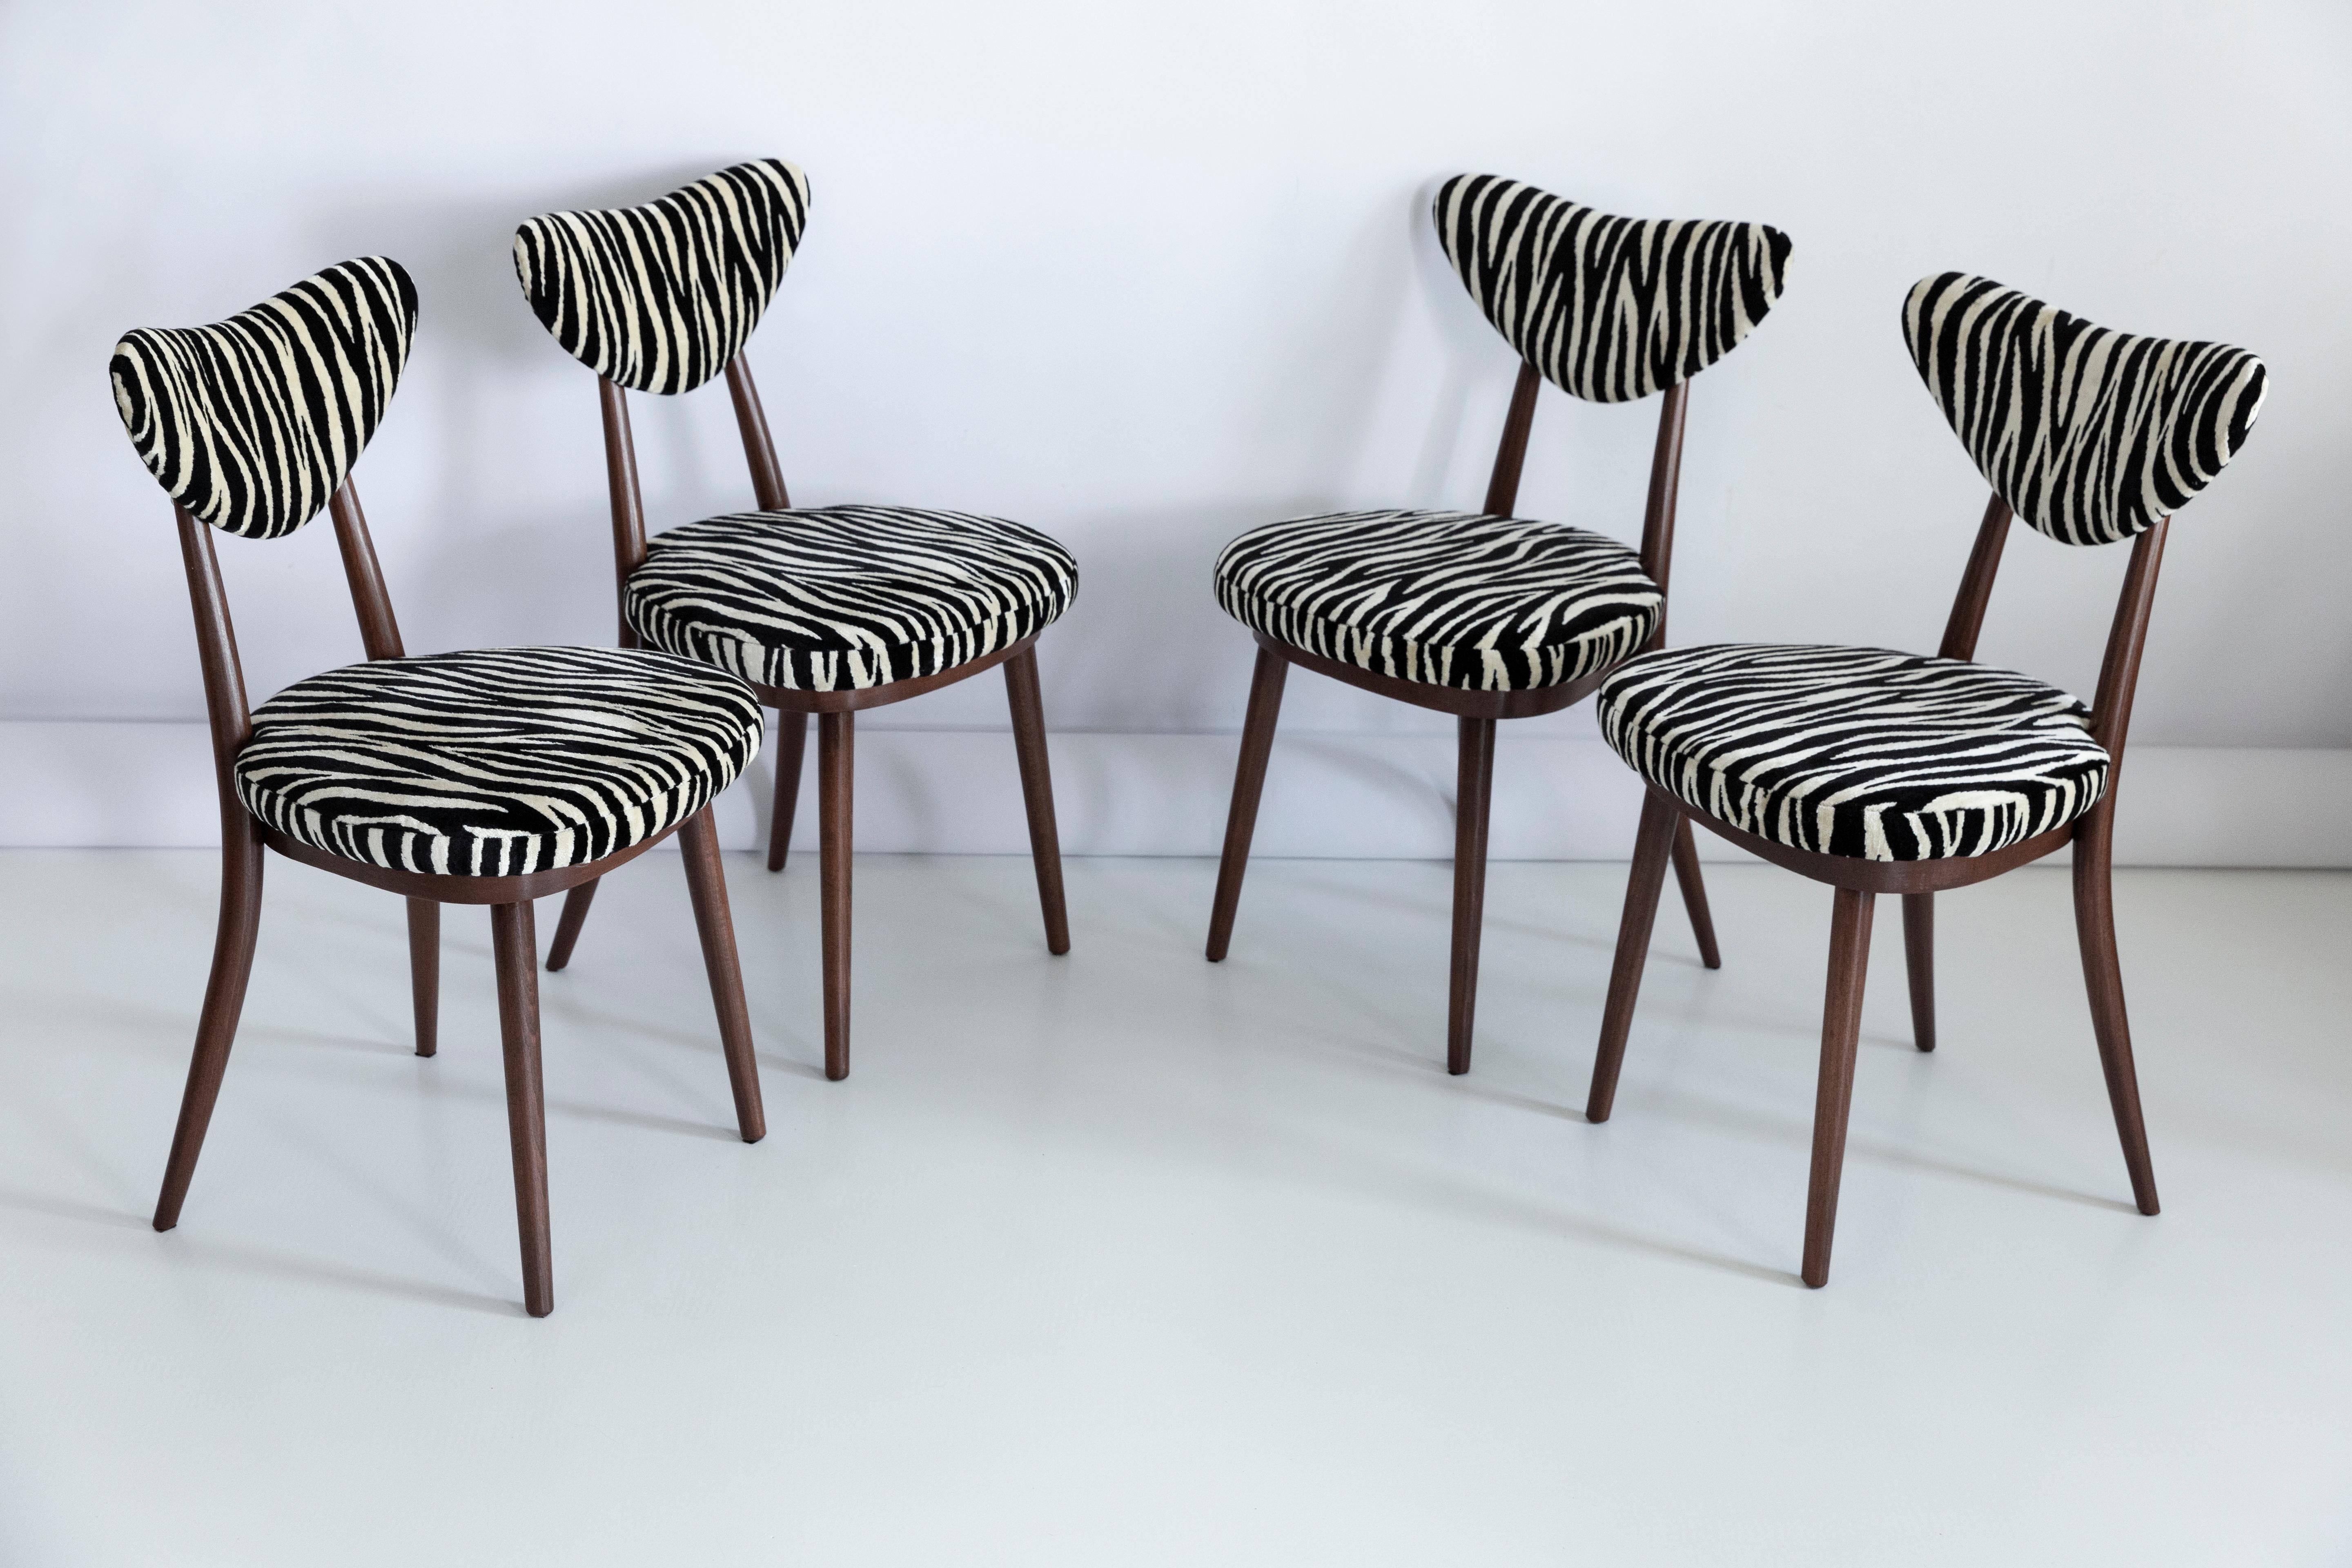 Six Midcentury Zebra Black White Heart Chairs, Hollywood Regency, Poland, 1960s In Excellent Condition For Sale In 05-080 Hornowek, PL